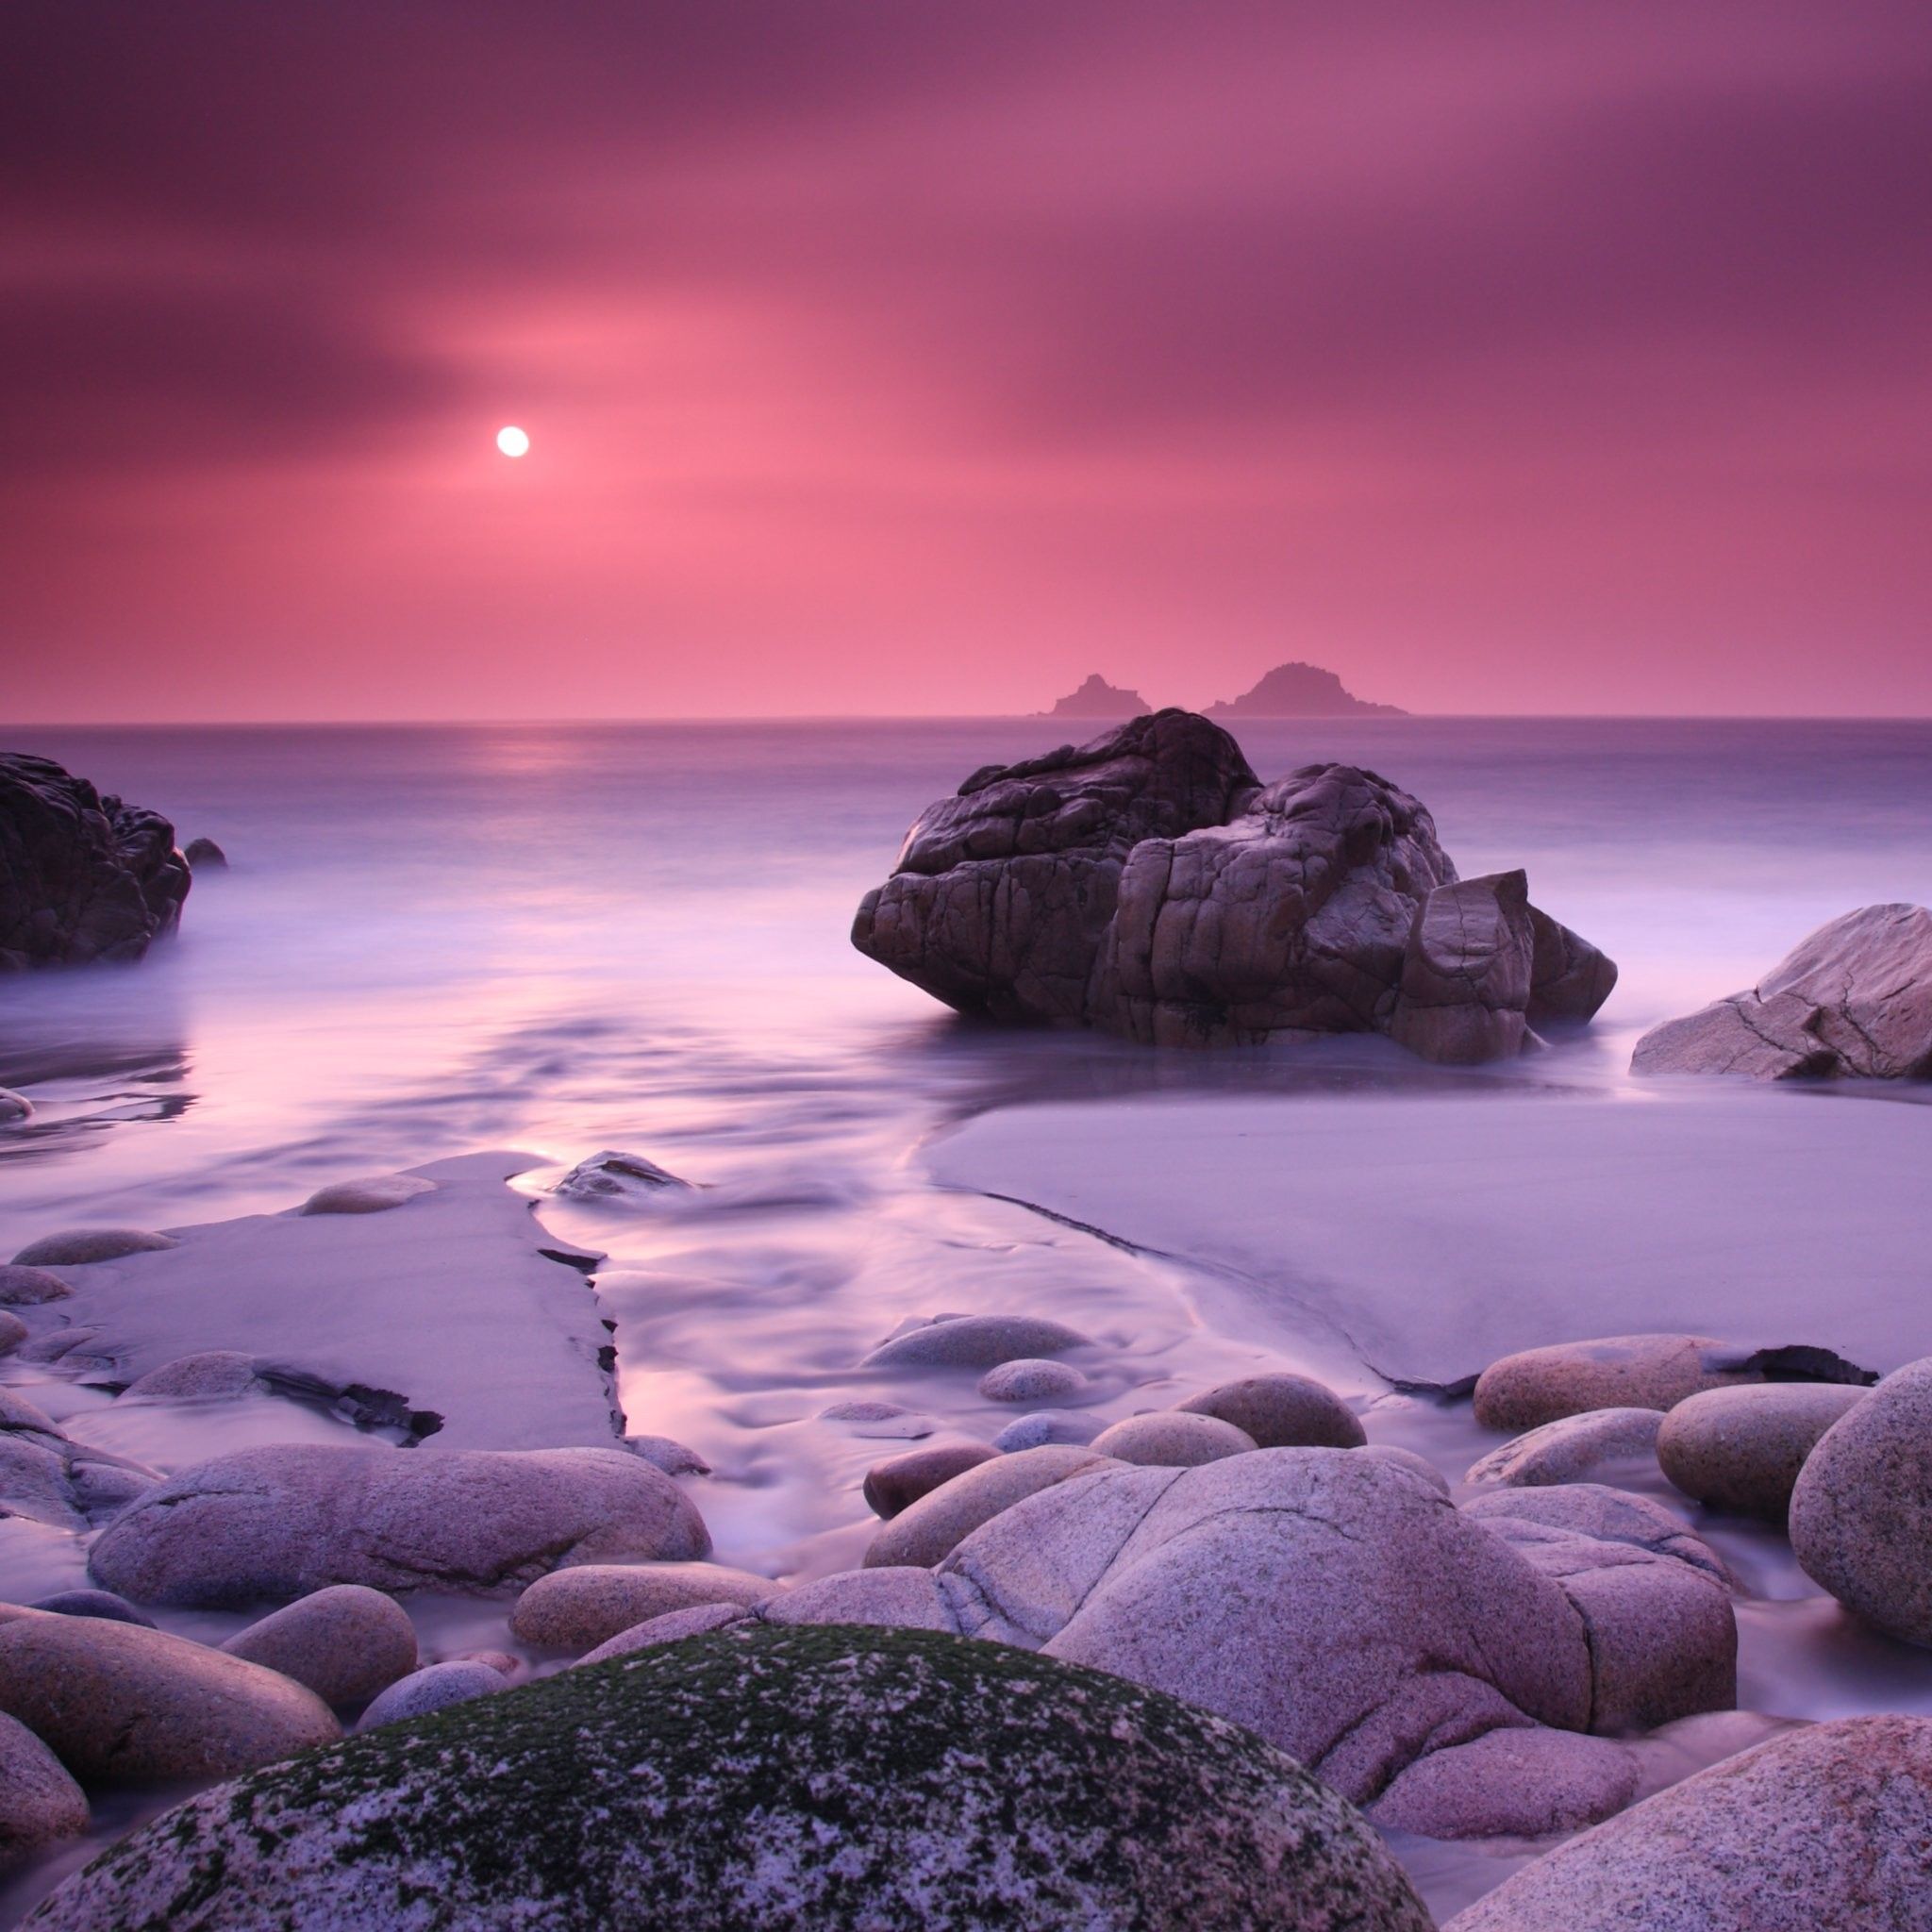 Pink Scenery Wallpaper Free Pink Scenery Background